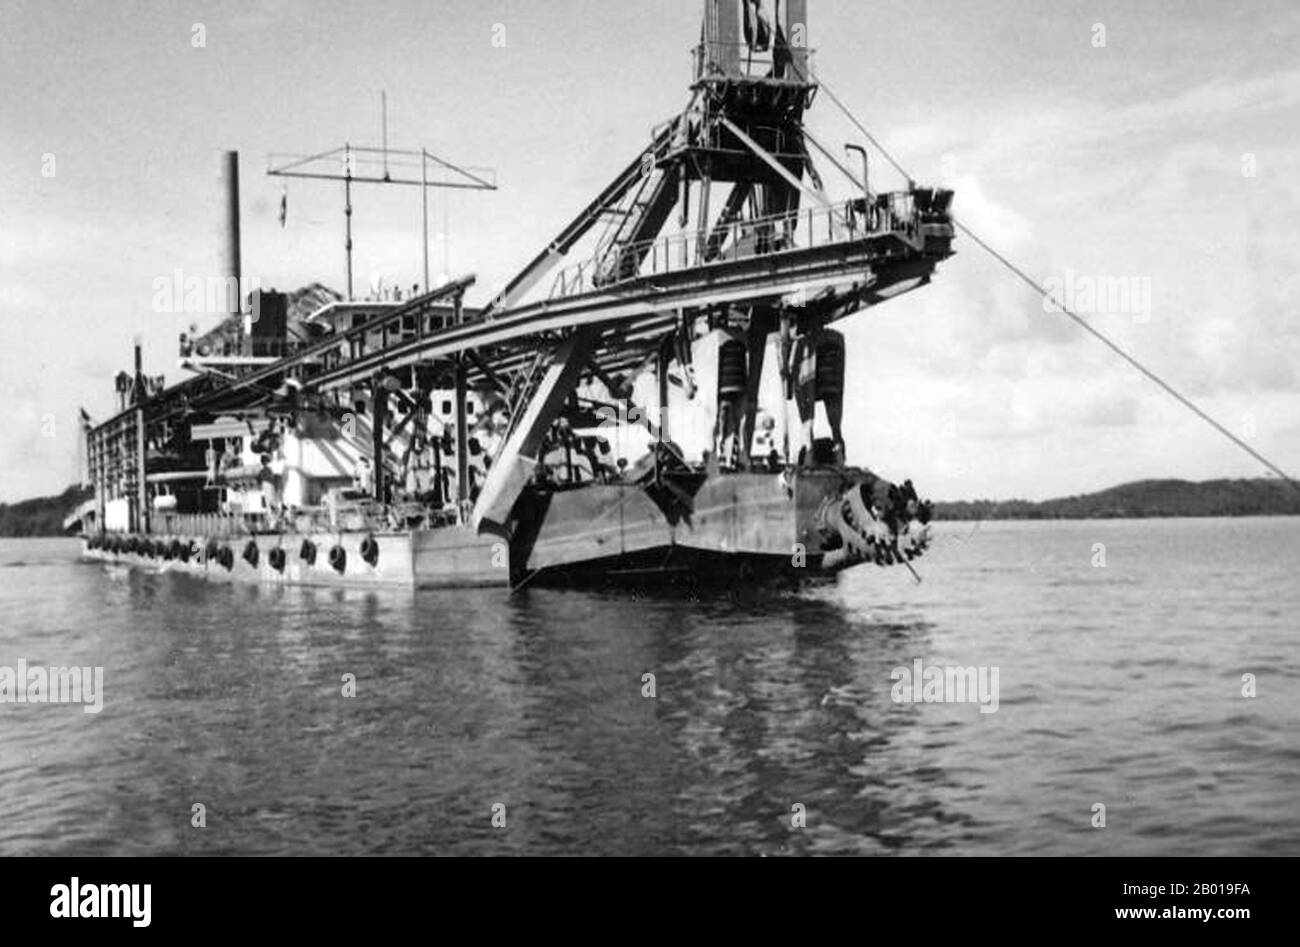 Thailand: A tin dredger anchored off Phuket in the Andaman Sea c. 1915.  The introduction of the first tin dredger in 1907 allowed the tin mining industry on Phuket to expand into a vast new area that had previously been untouched. Several types of dredges were used locally. Hydraulic dredges sucked the ocean floor for the alluvial deposits of tin through a pipe, separated the tin and discharged the spoil on the shore through a floating pipeline. Elevator dredges employed an endless chain of small buckets to scrape the ocean floor and separate the tin ore from the rest of the spoil. Stock Photo